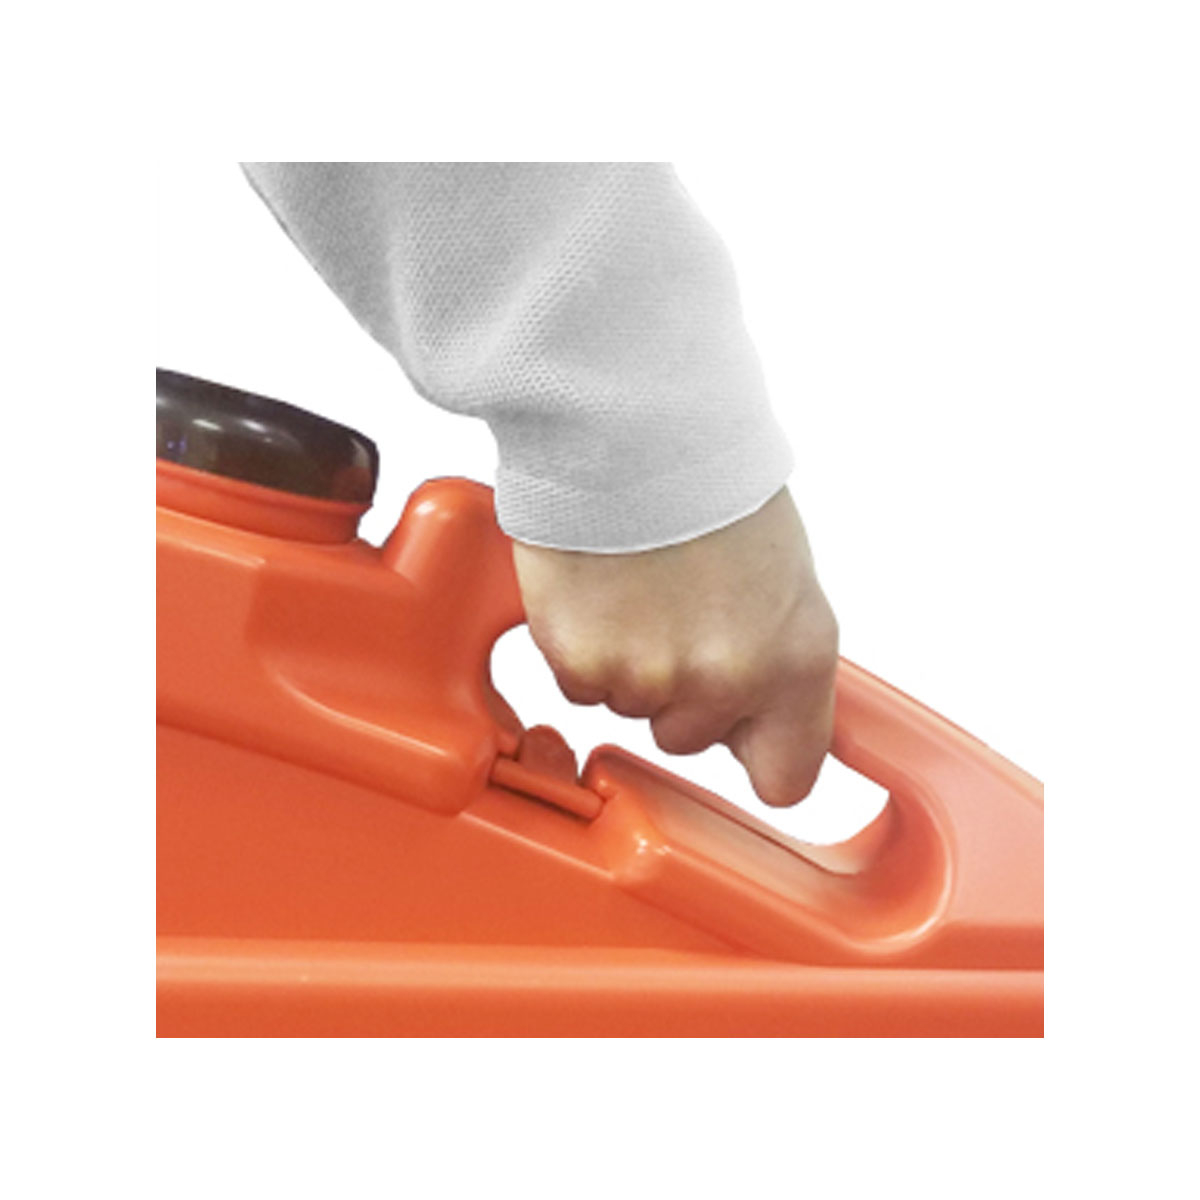 FlexMaster Expandable Safety Barricade Has a Handy Carry Handle For Easy Transport